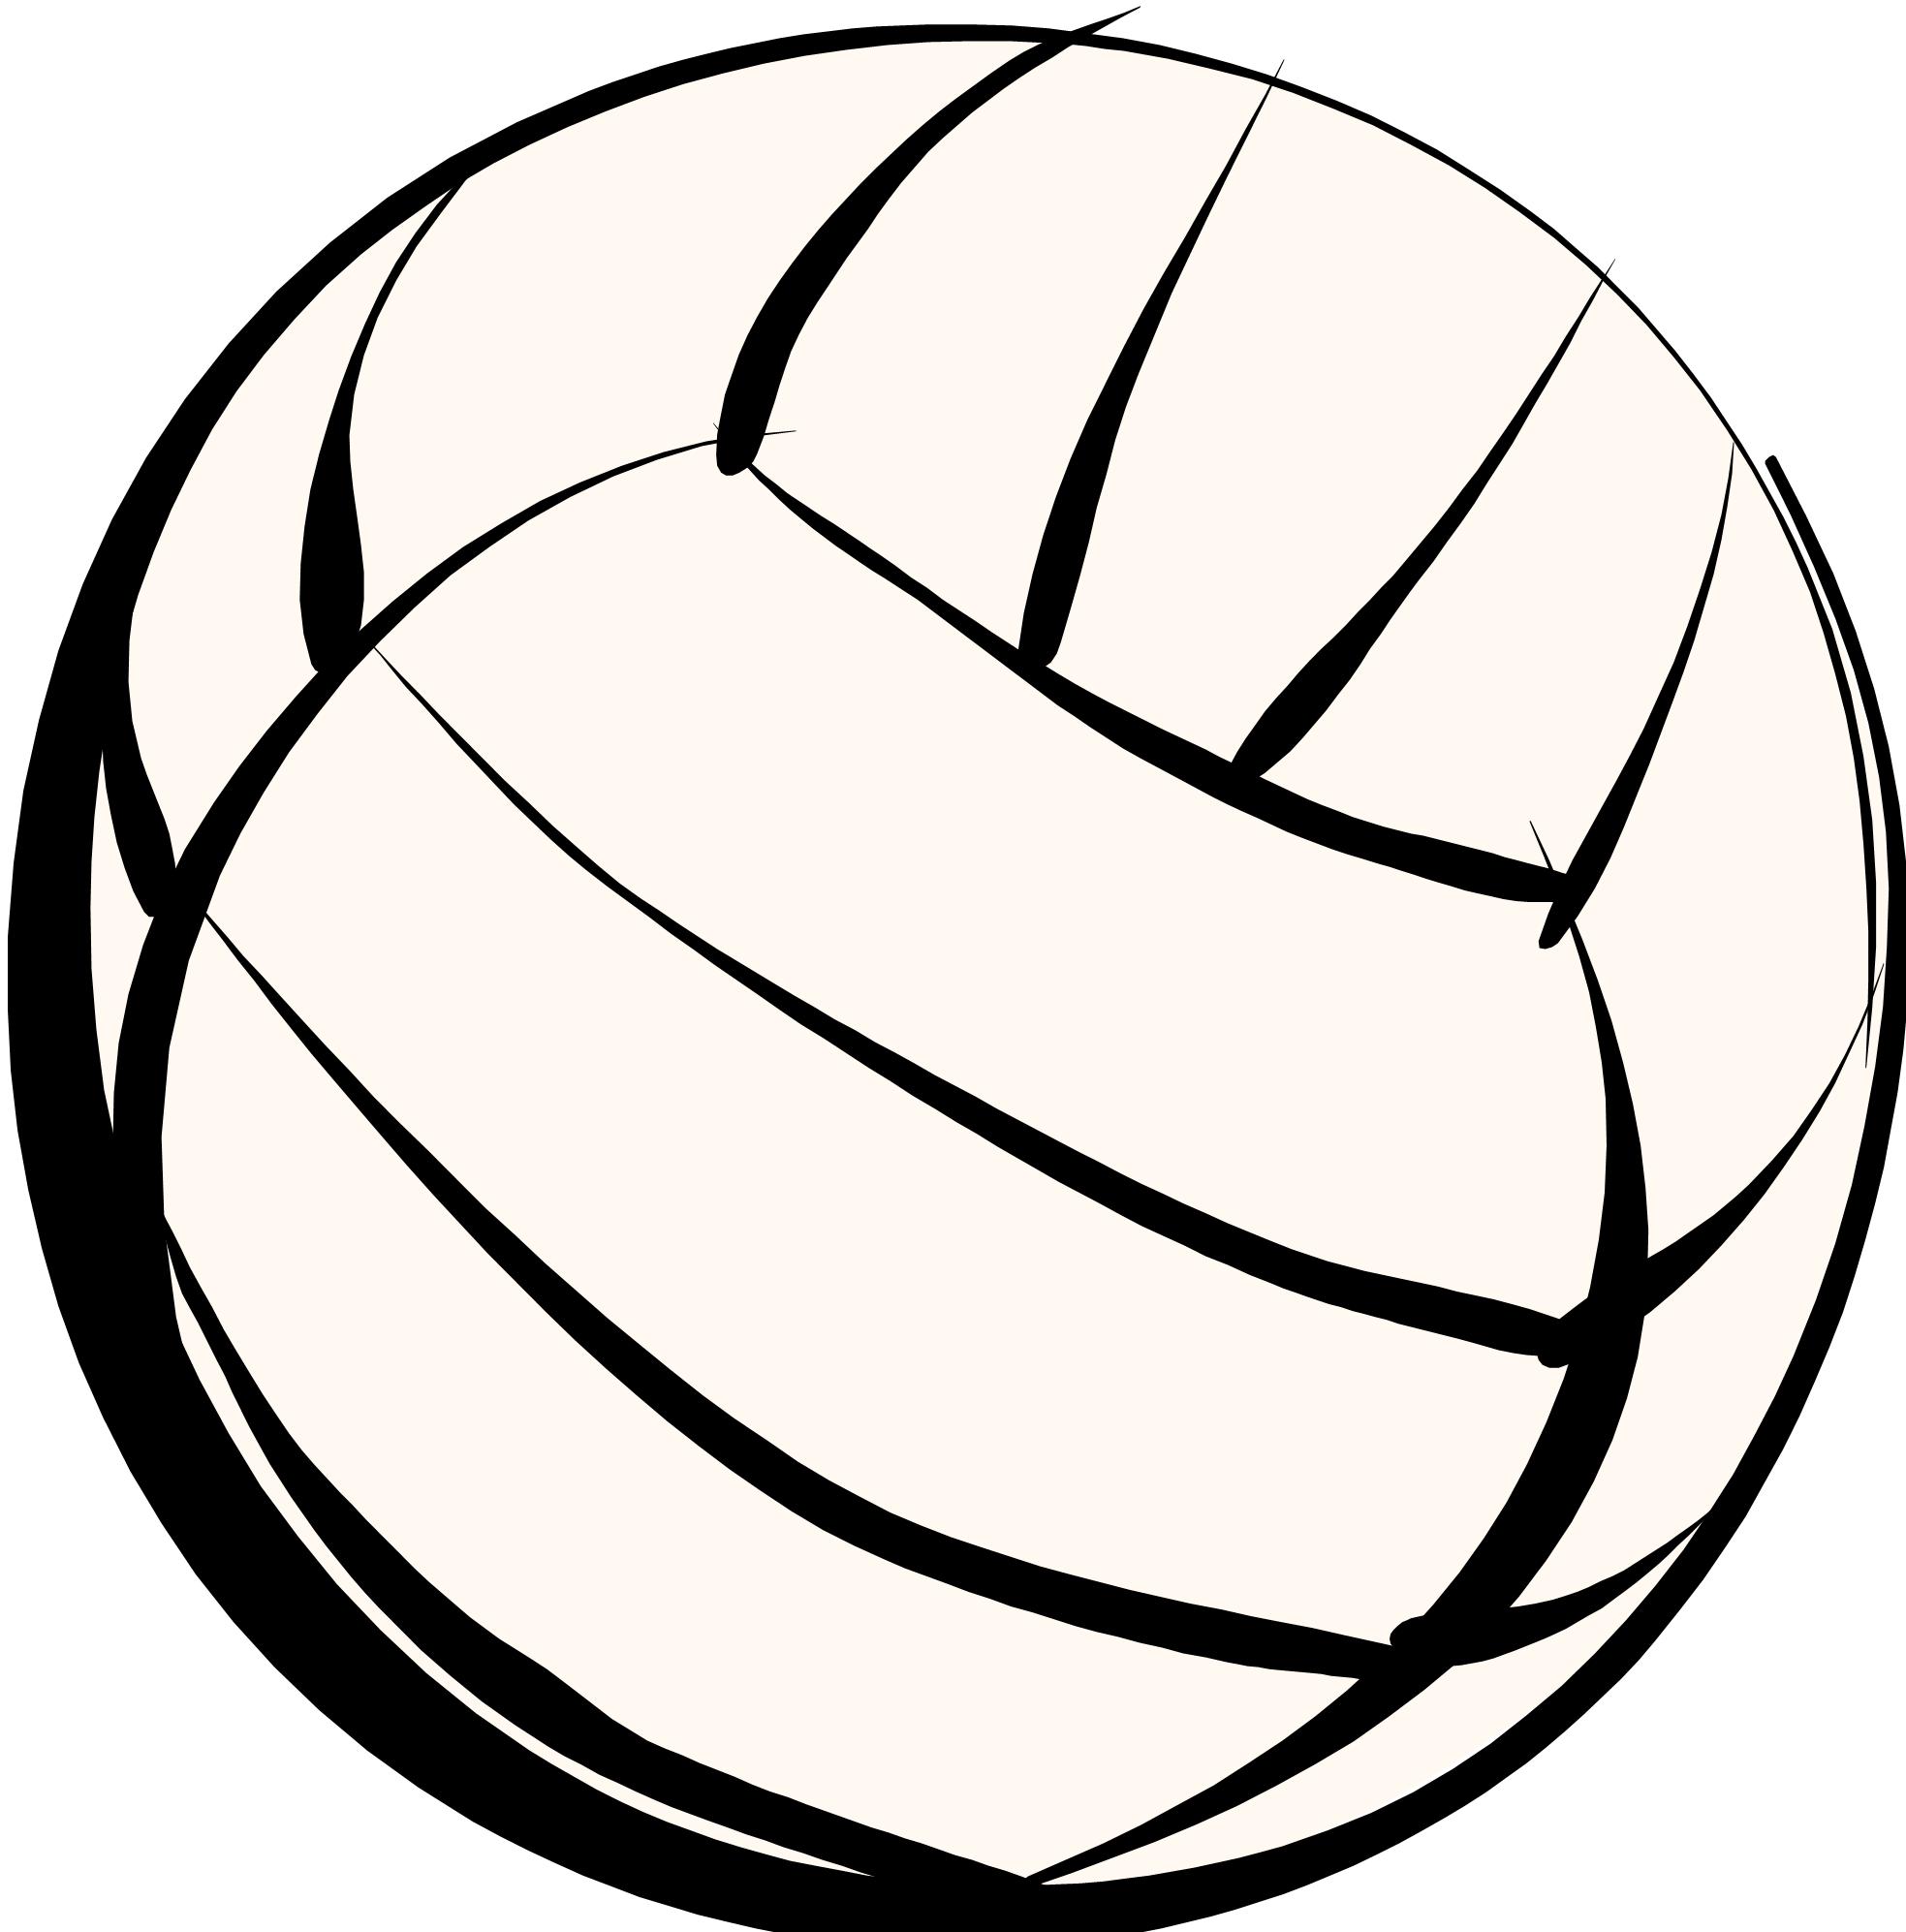 Volleyball clipart vector. Clip art free image